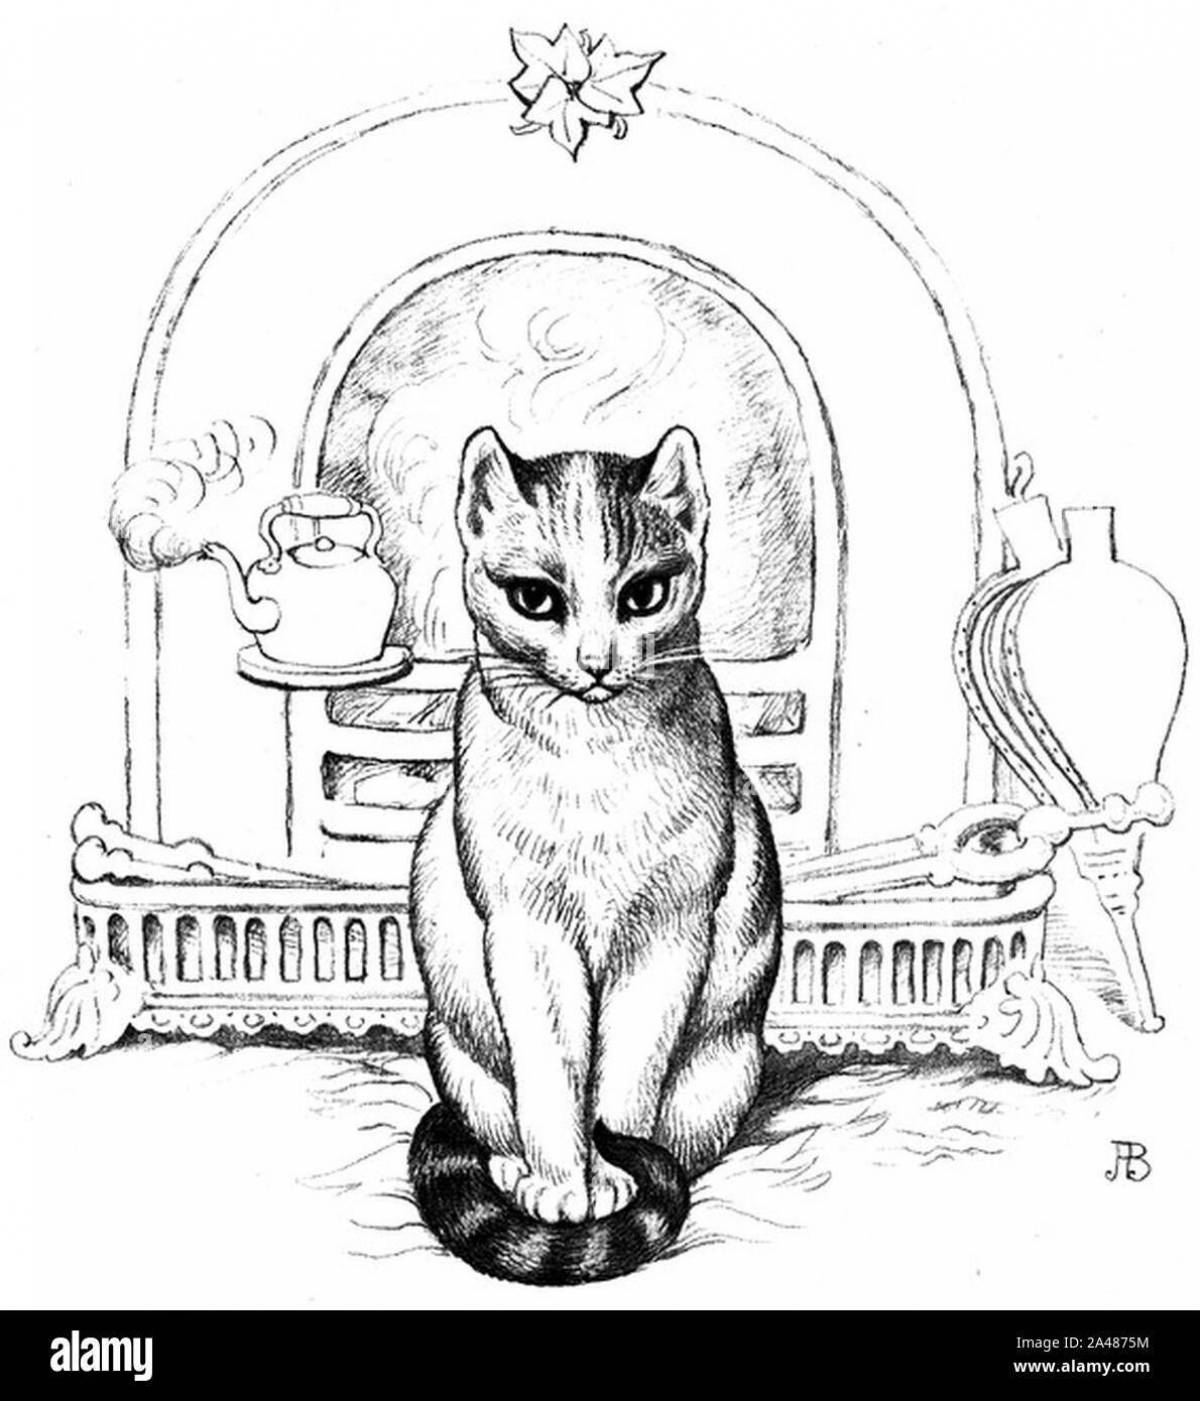 Adorable sitting cat coloring page